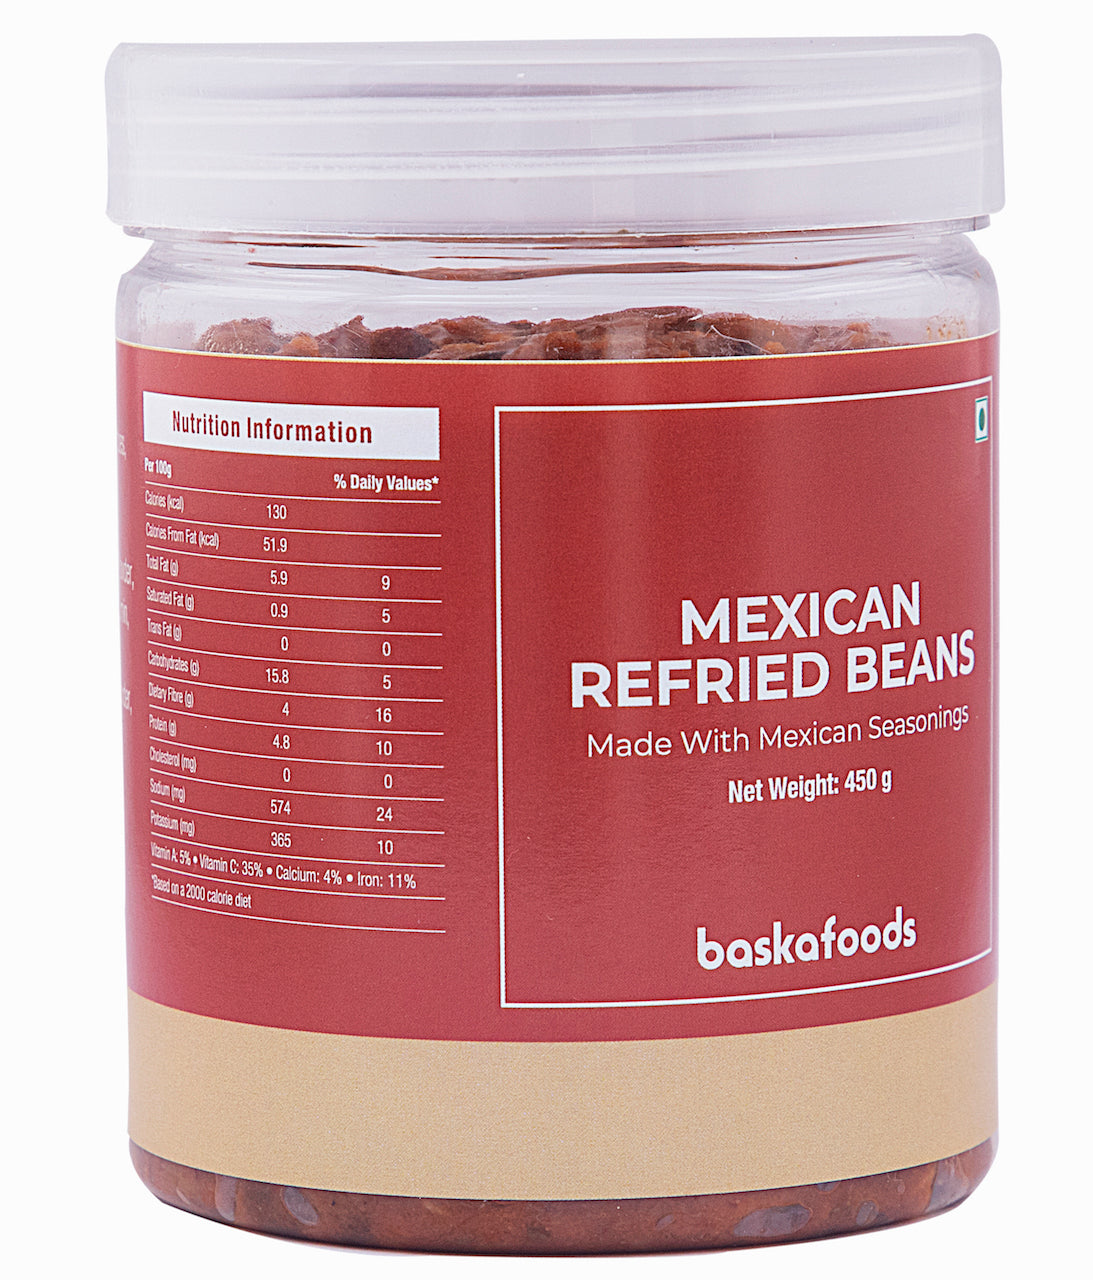 Mexican Refried Beans